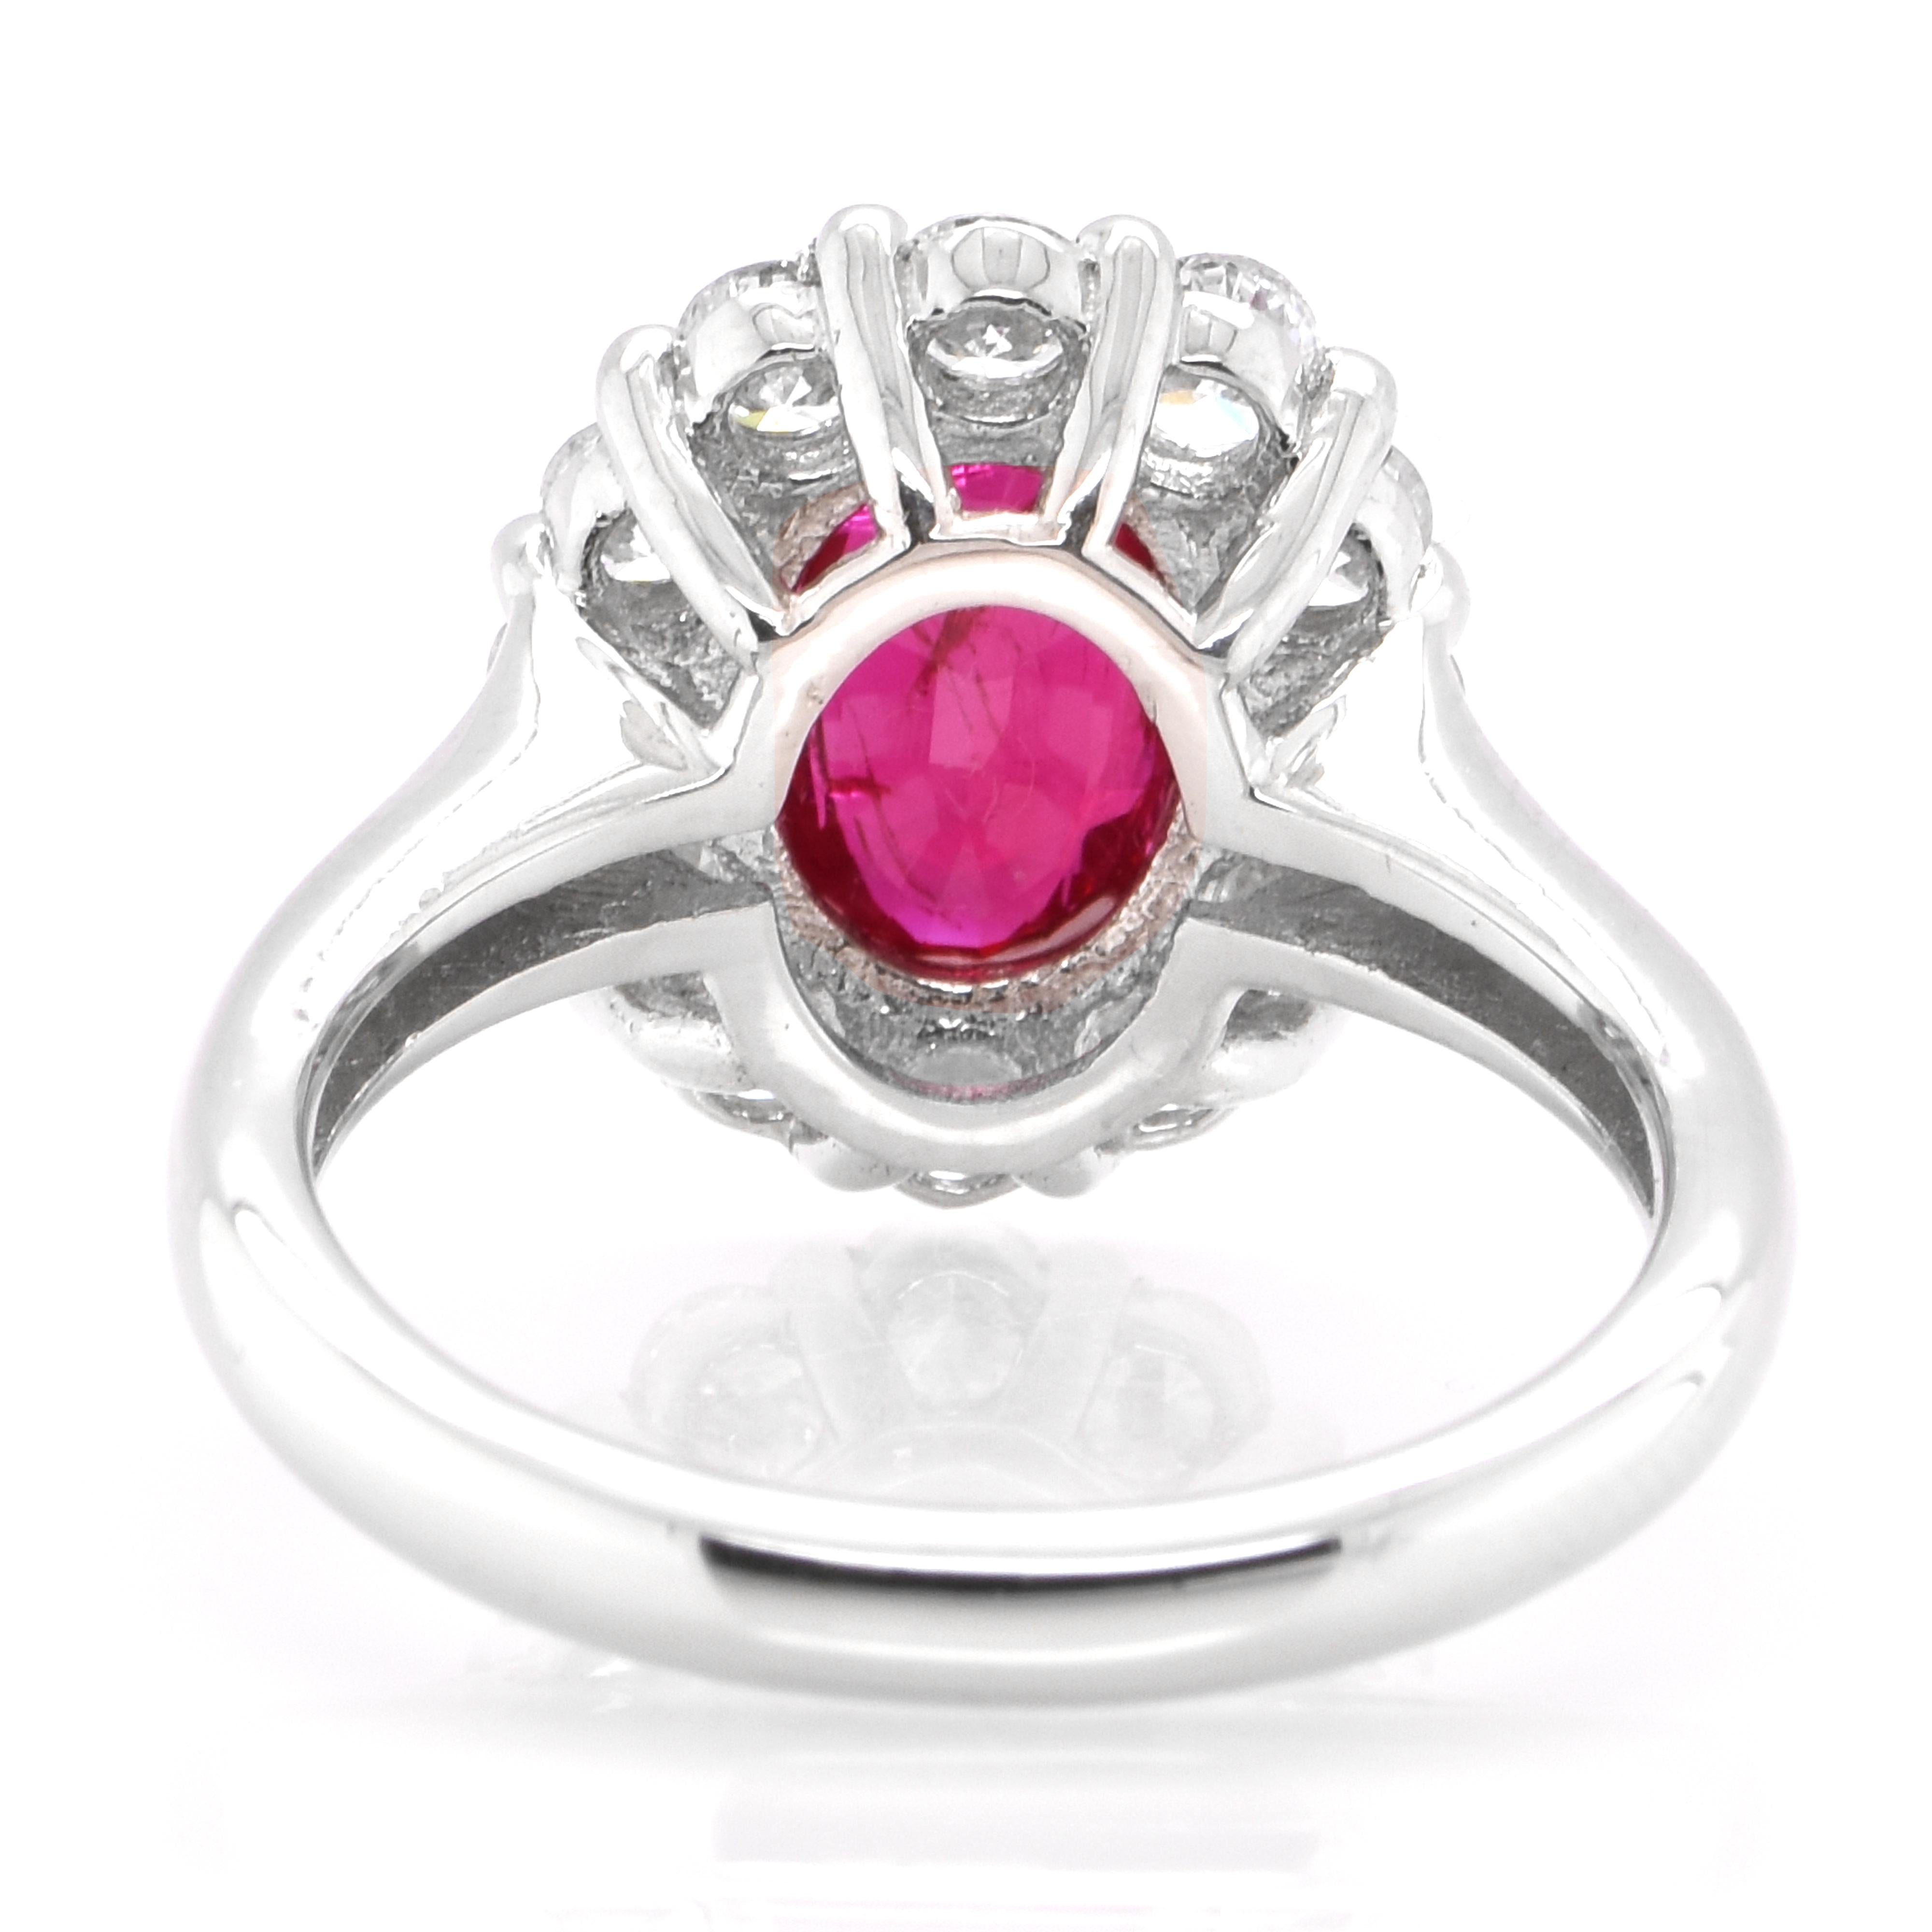 Women's GRS Certified 1.51 Carat Unheated Pigeon's Blood Color Ruby Ring Set in Platinum